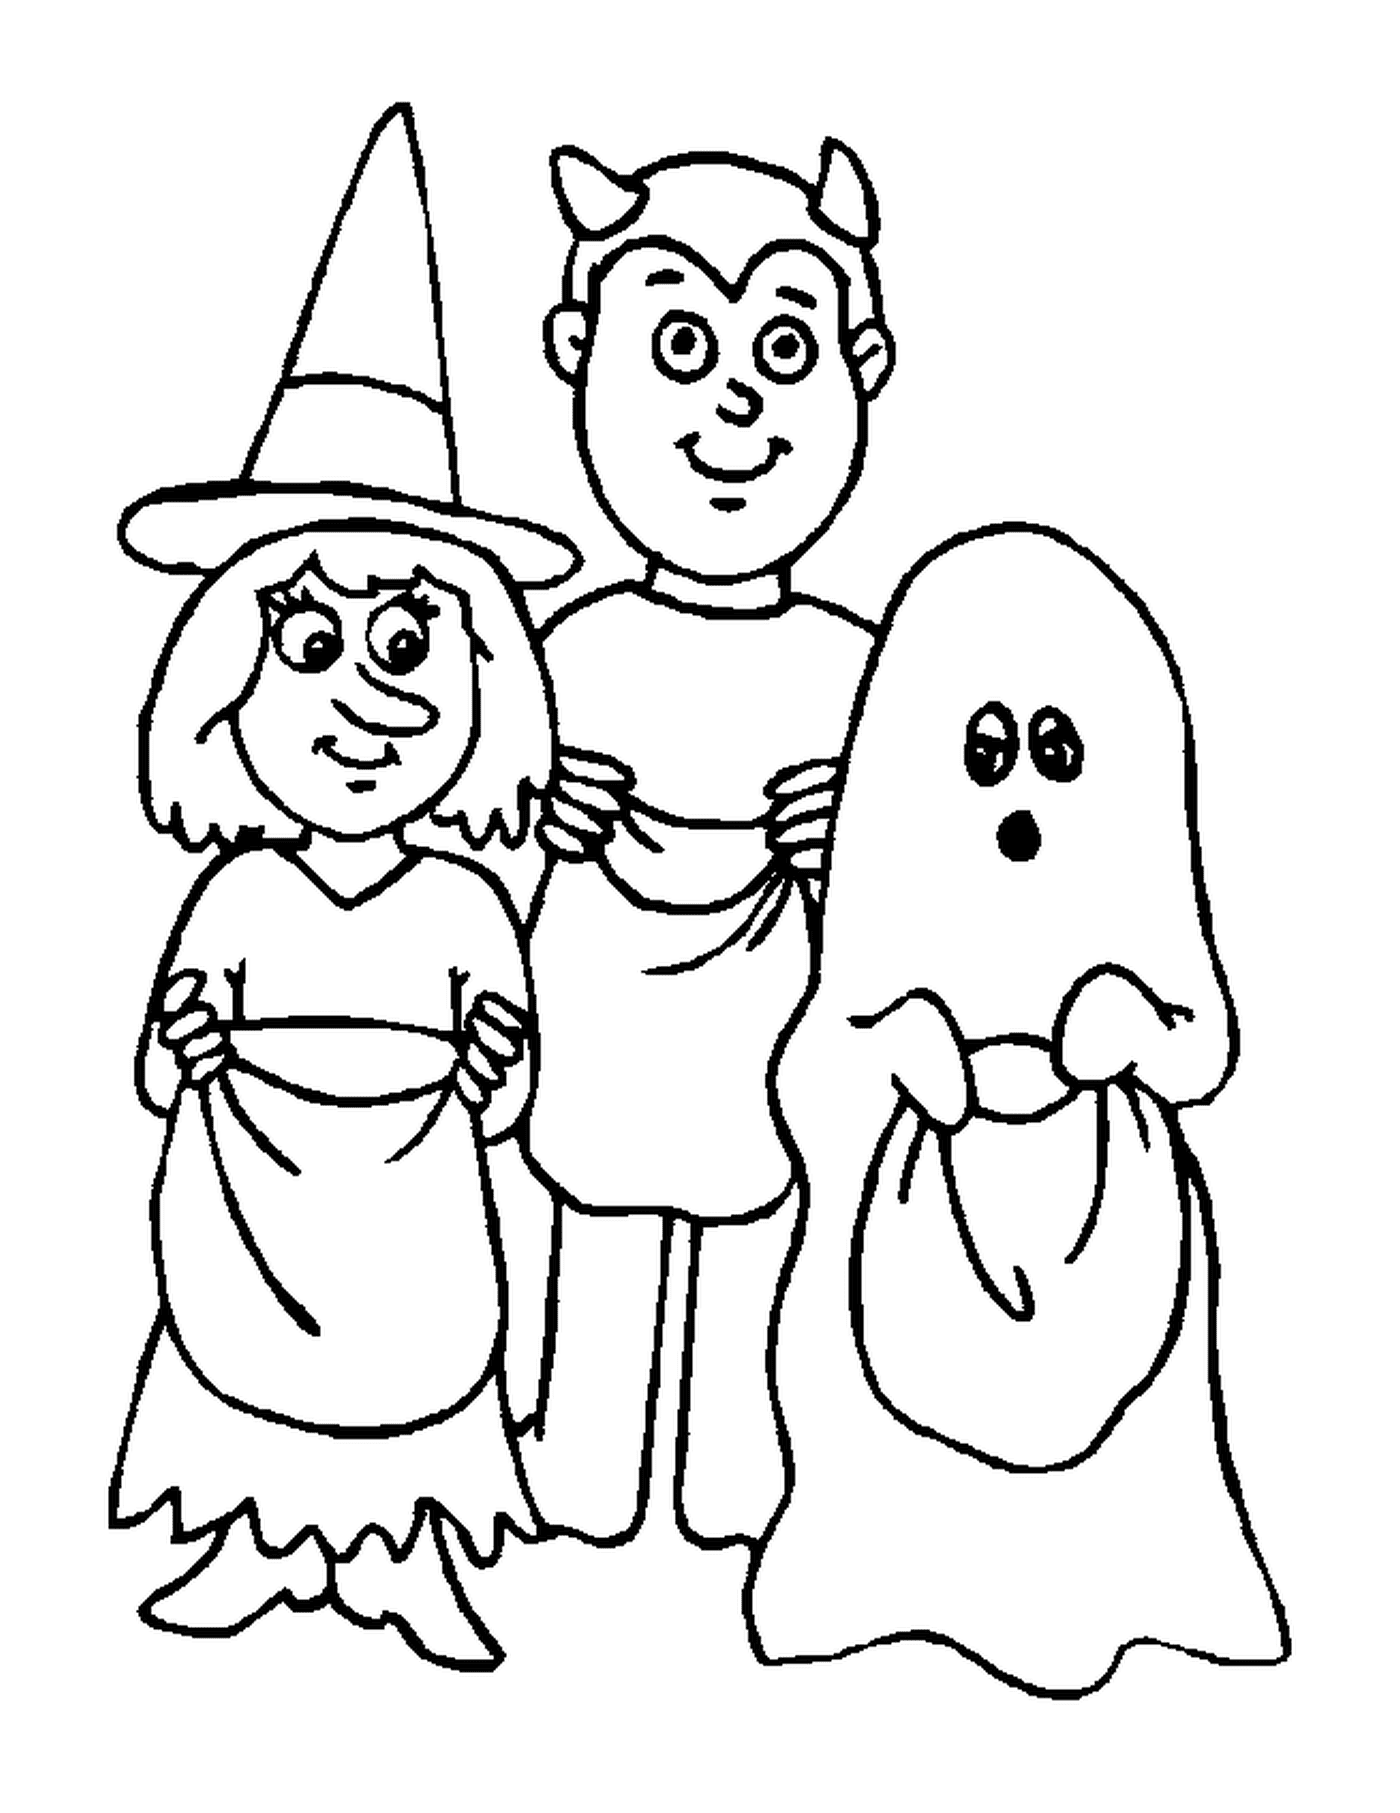  man, woman and ghost disguised to scare for Halloween 